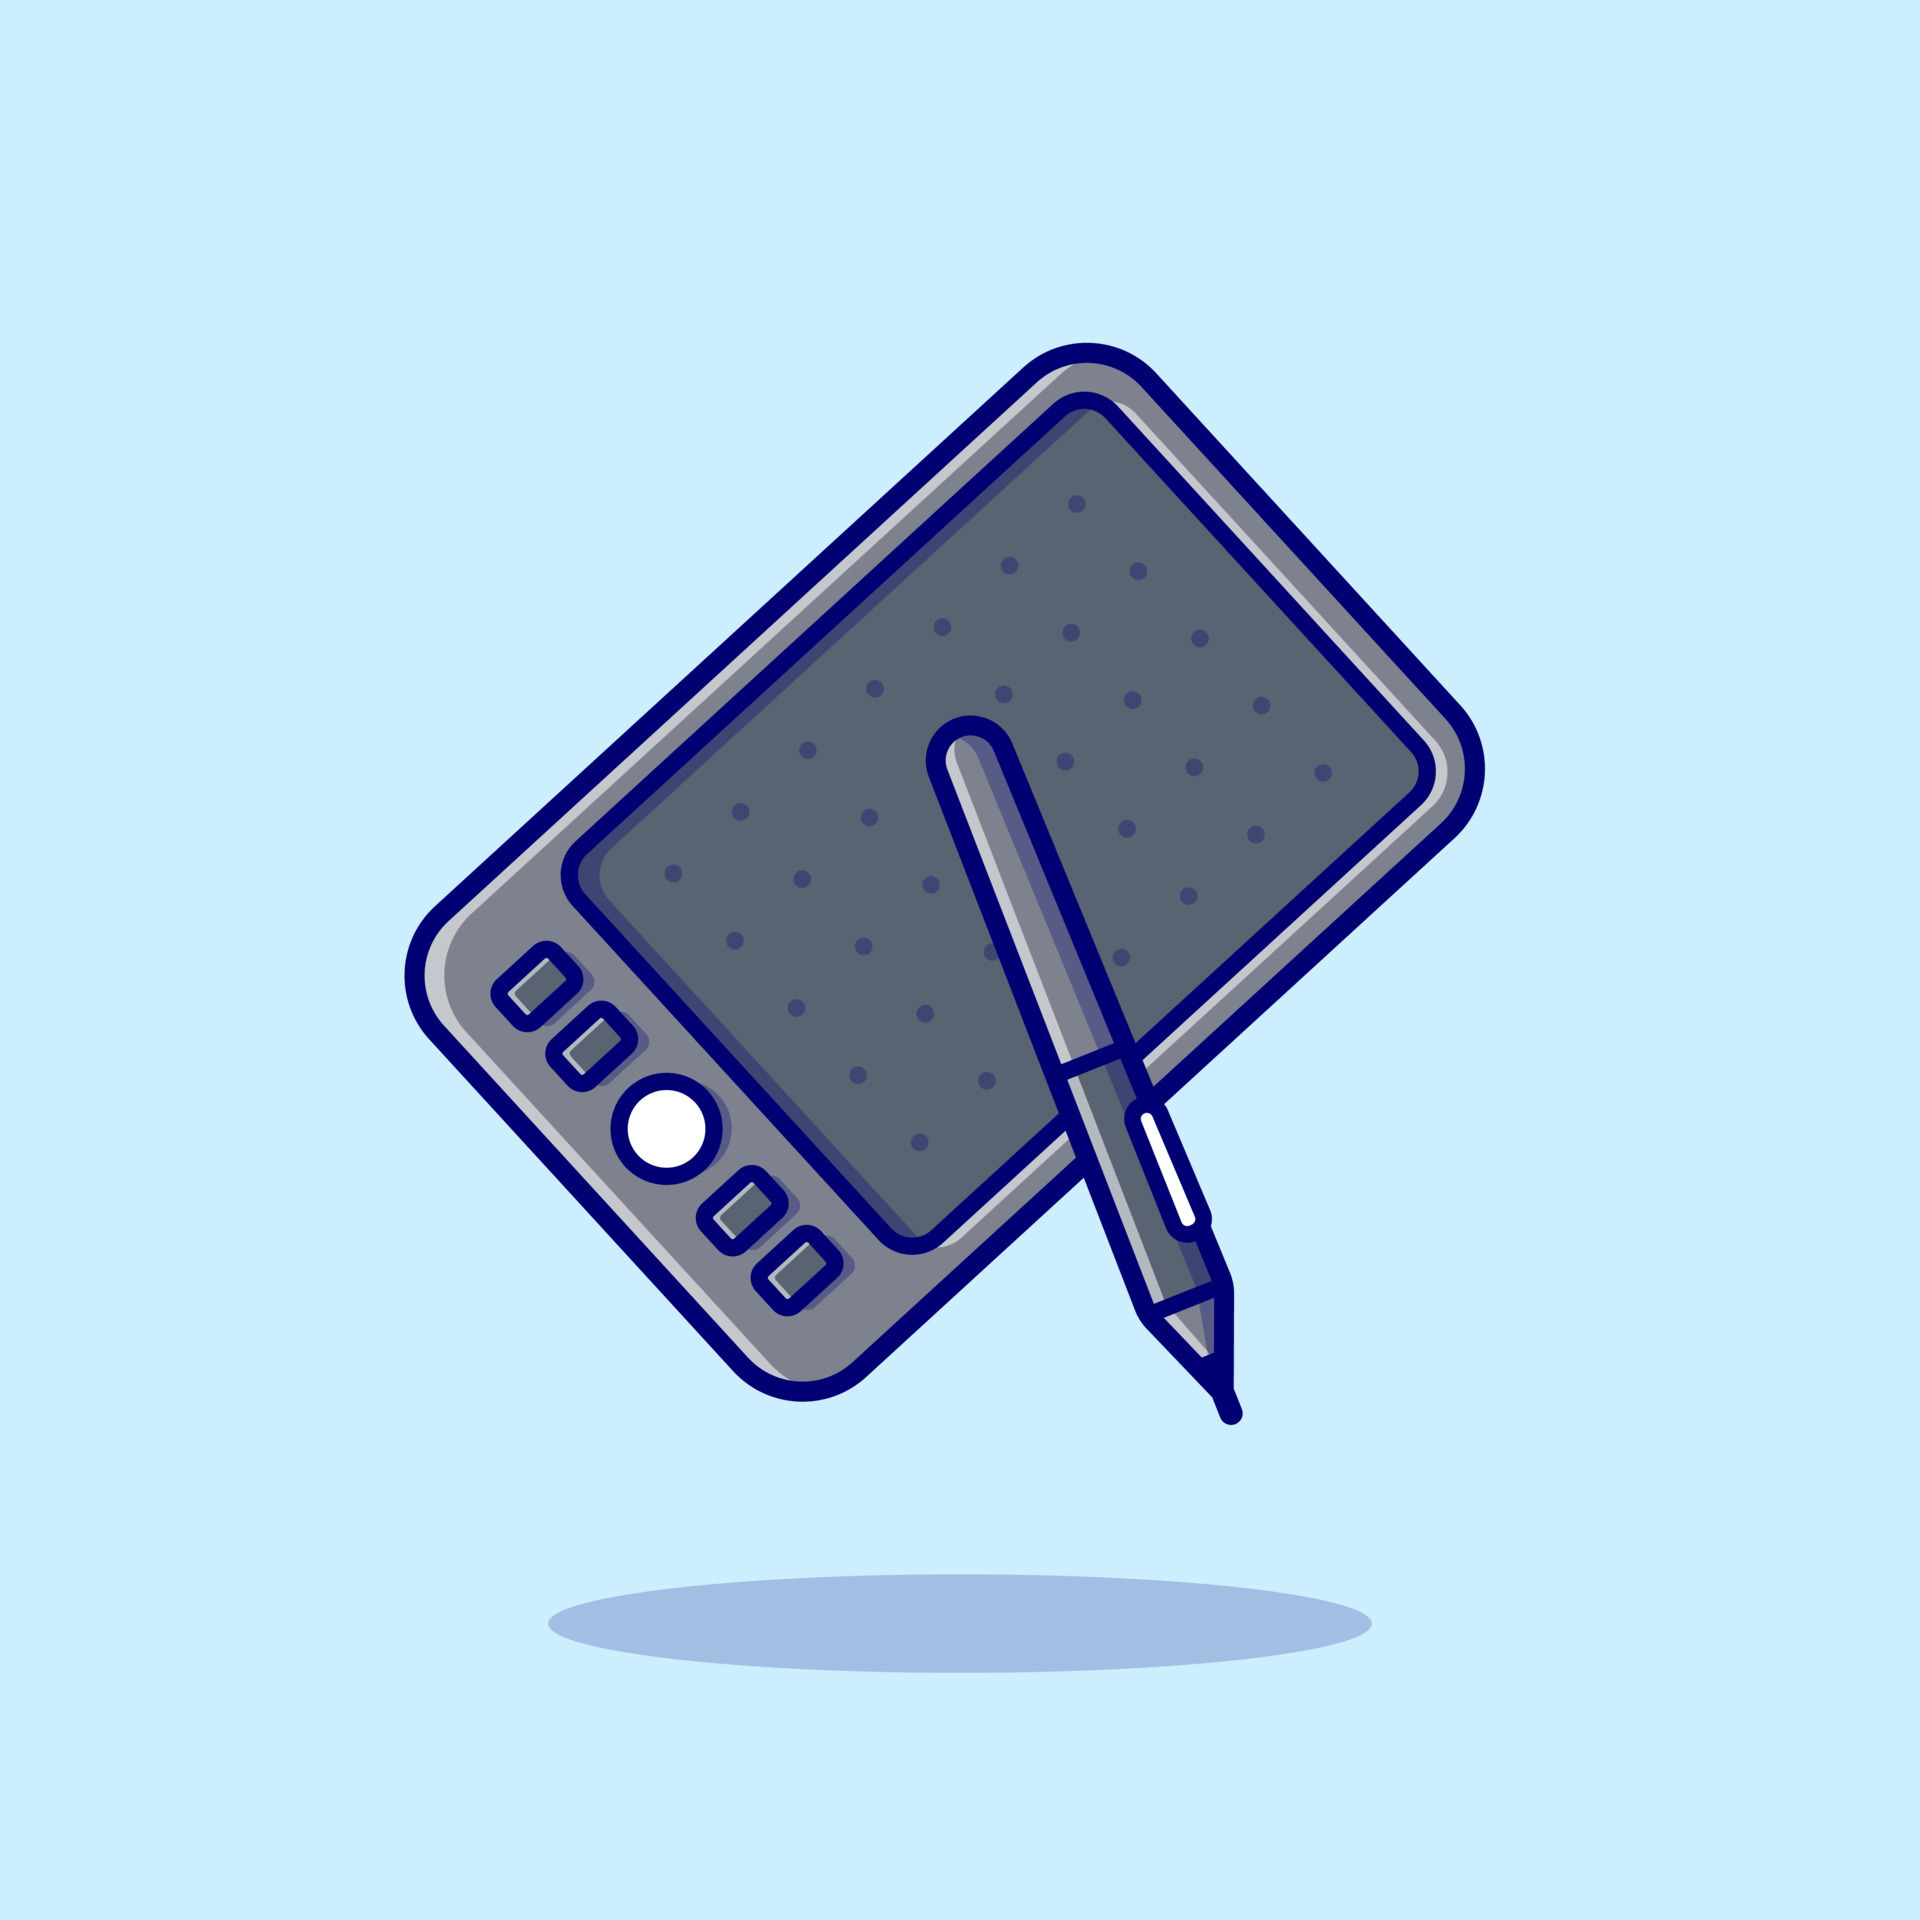 Free Vector  Tablet and stylus pencil cartoon vector icon illustration.